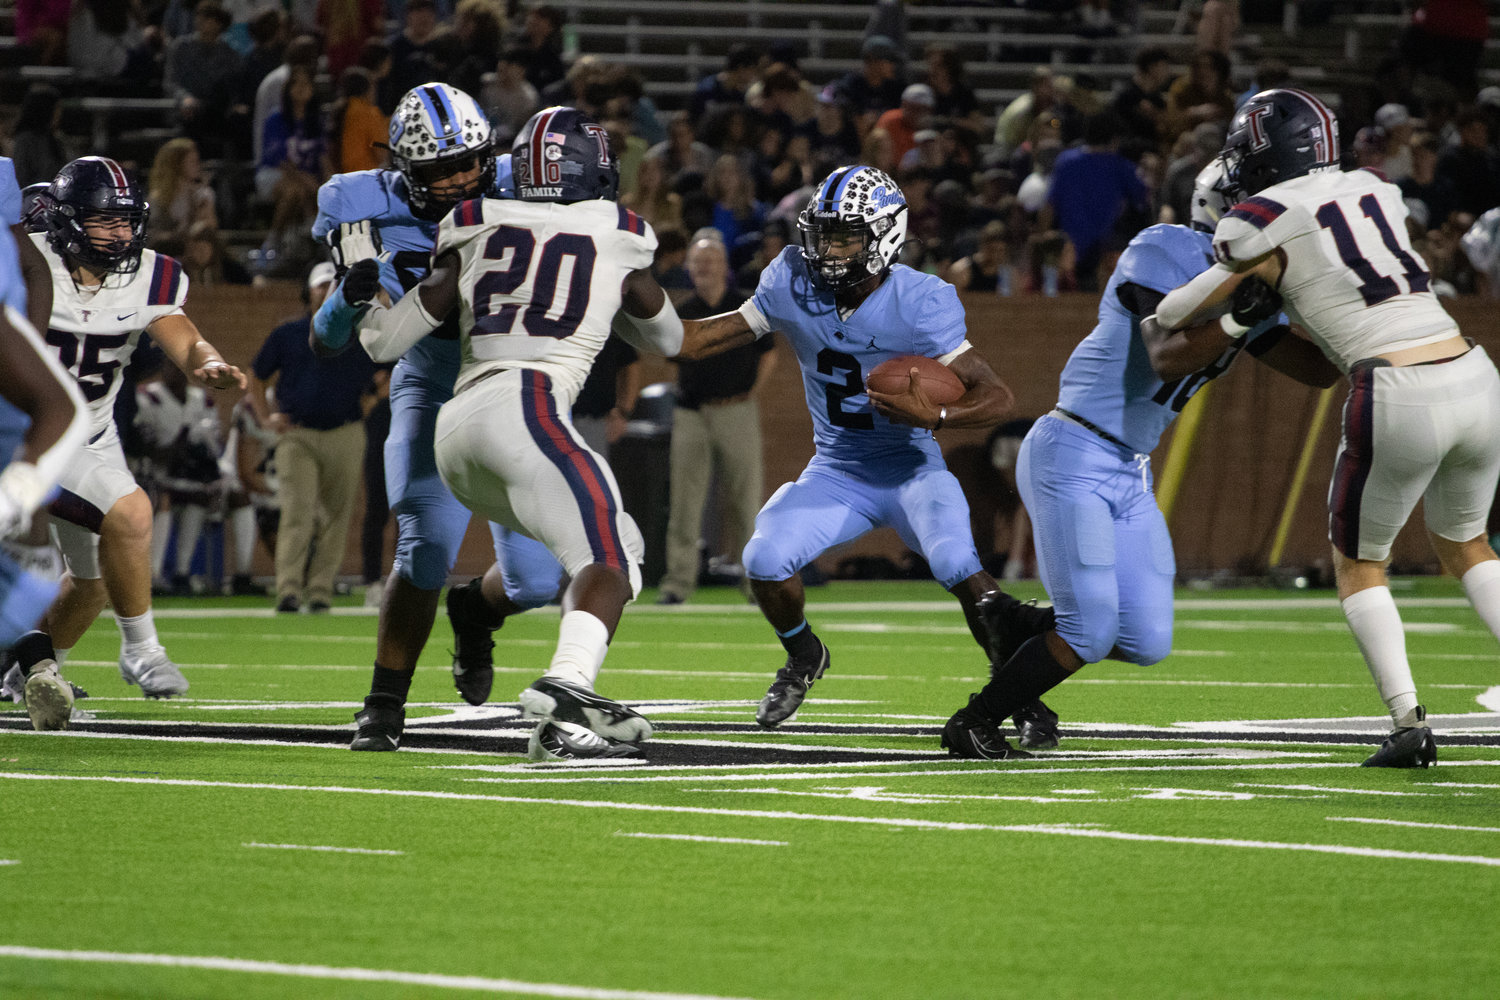 Paetow's Derrick Johnson runs the ball during Friday's game between Tompkins and Paetow at Rhodes Stadium.